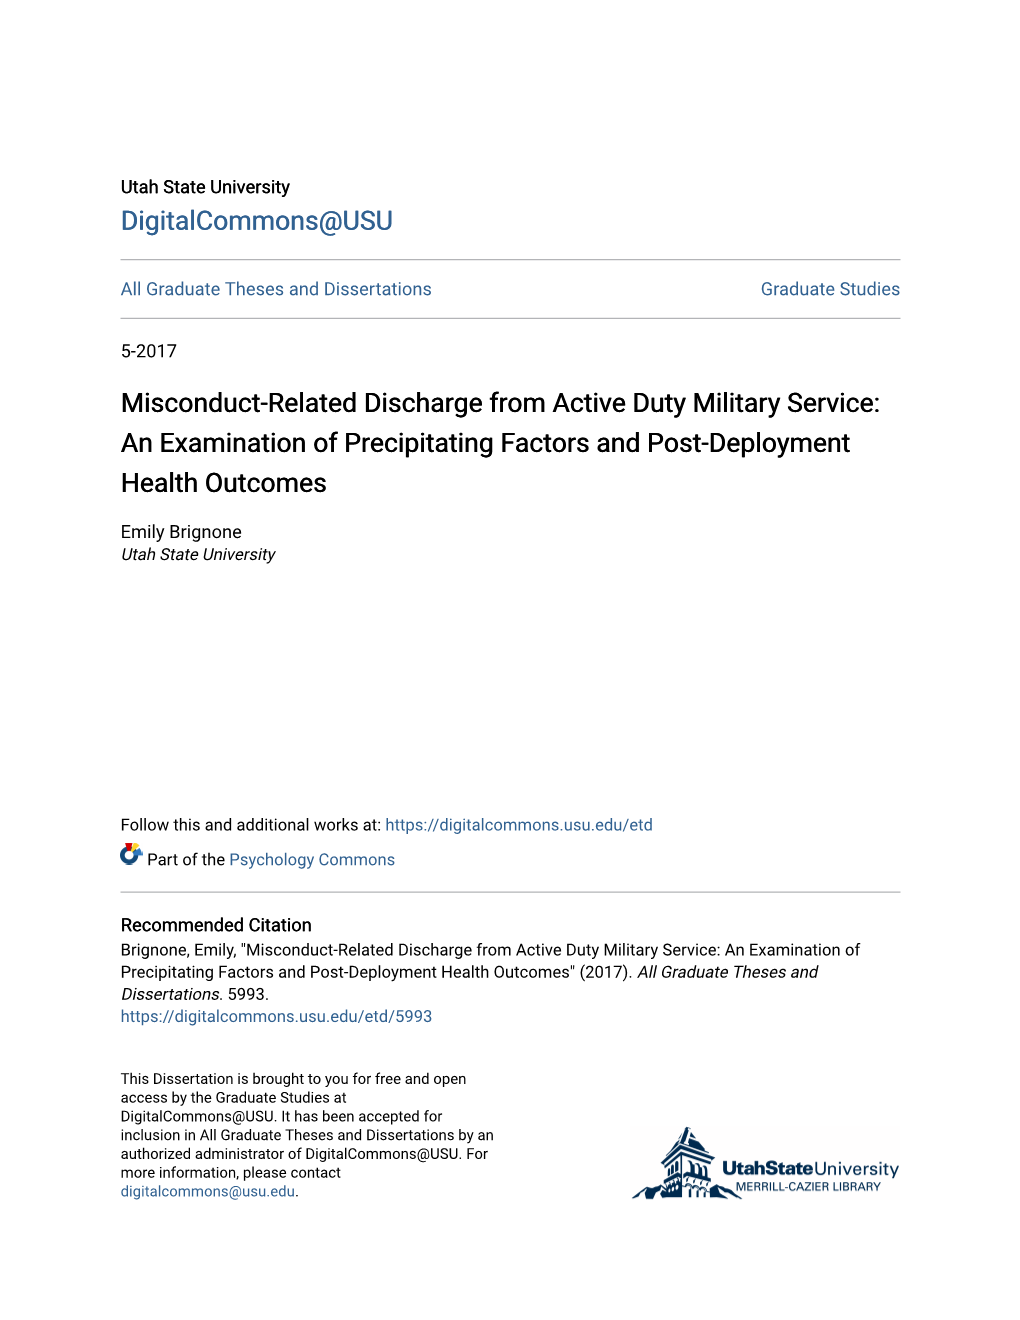 Misconduct-Related Discharge from Active Duty Military Service: an Examination of Precipitating Factors and Post-Deployment Health Outcomes